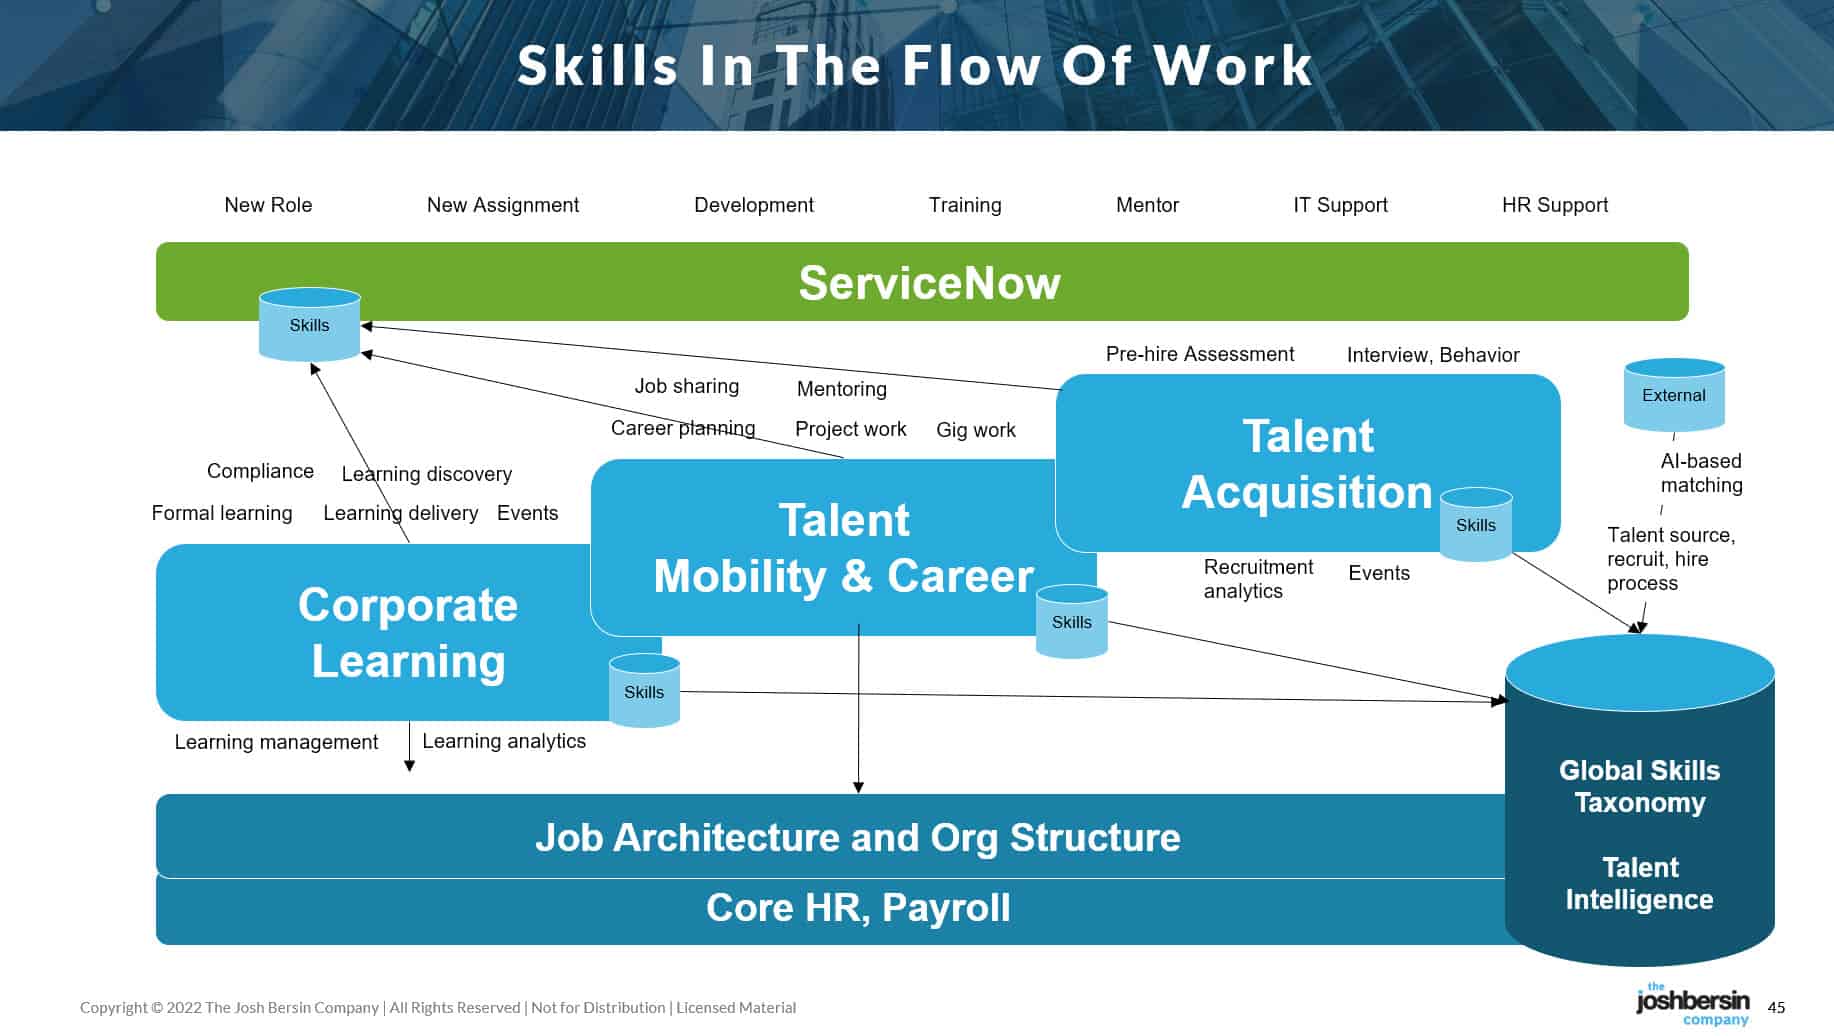 ServiceNow Acquires Hitch: Entering The Skills And HCM Market